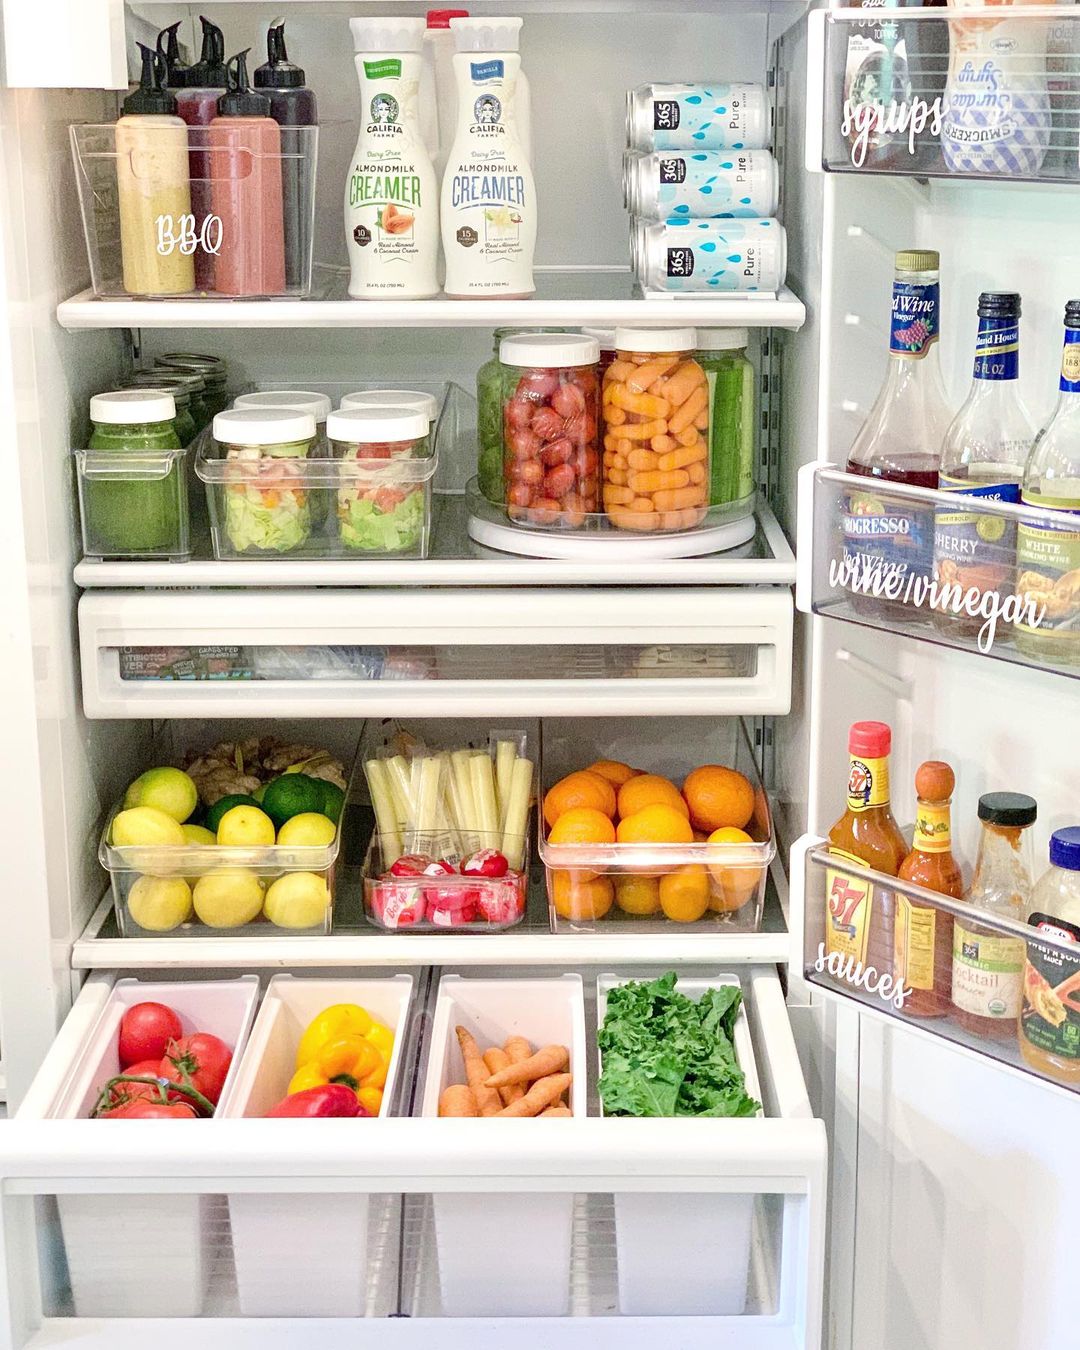 Neatly organized fridge that uses plastic bins. Photo by Instagram user @livecomposed